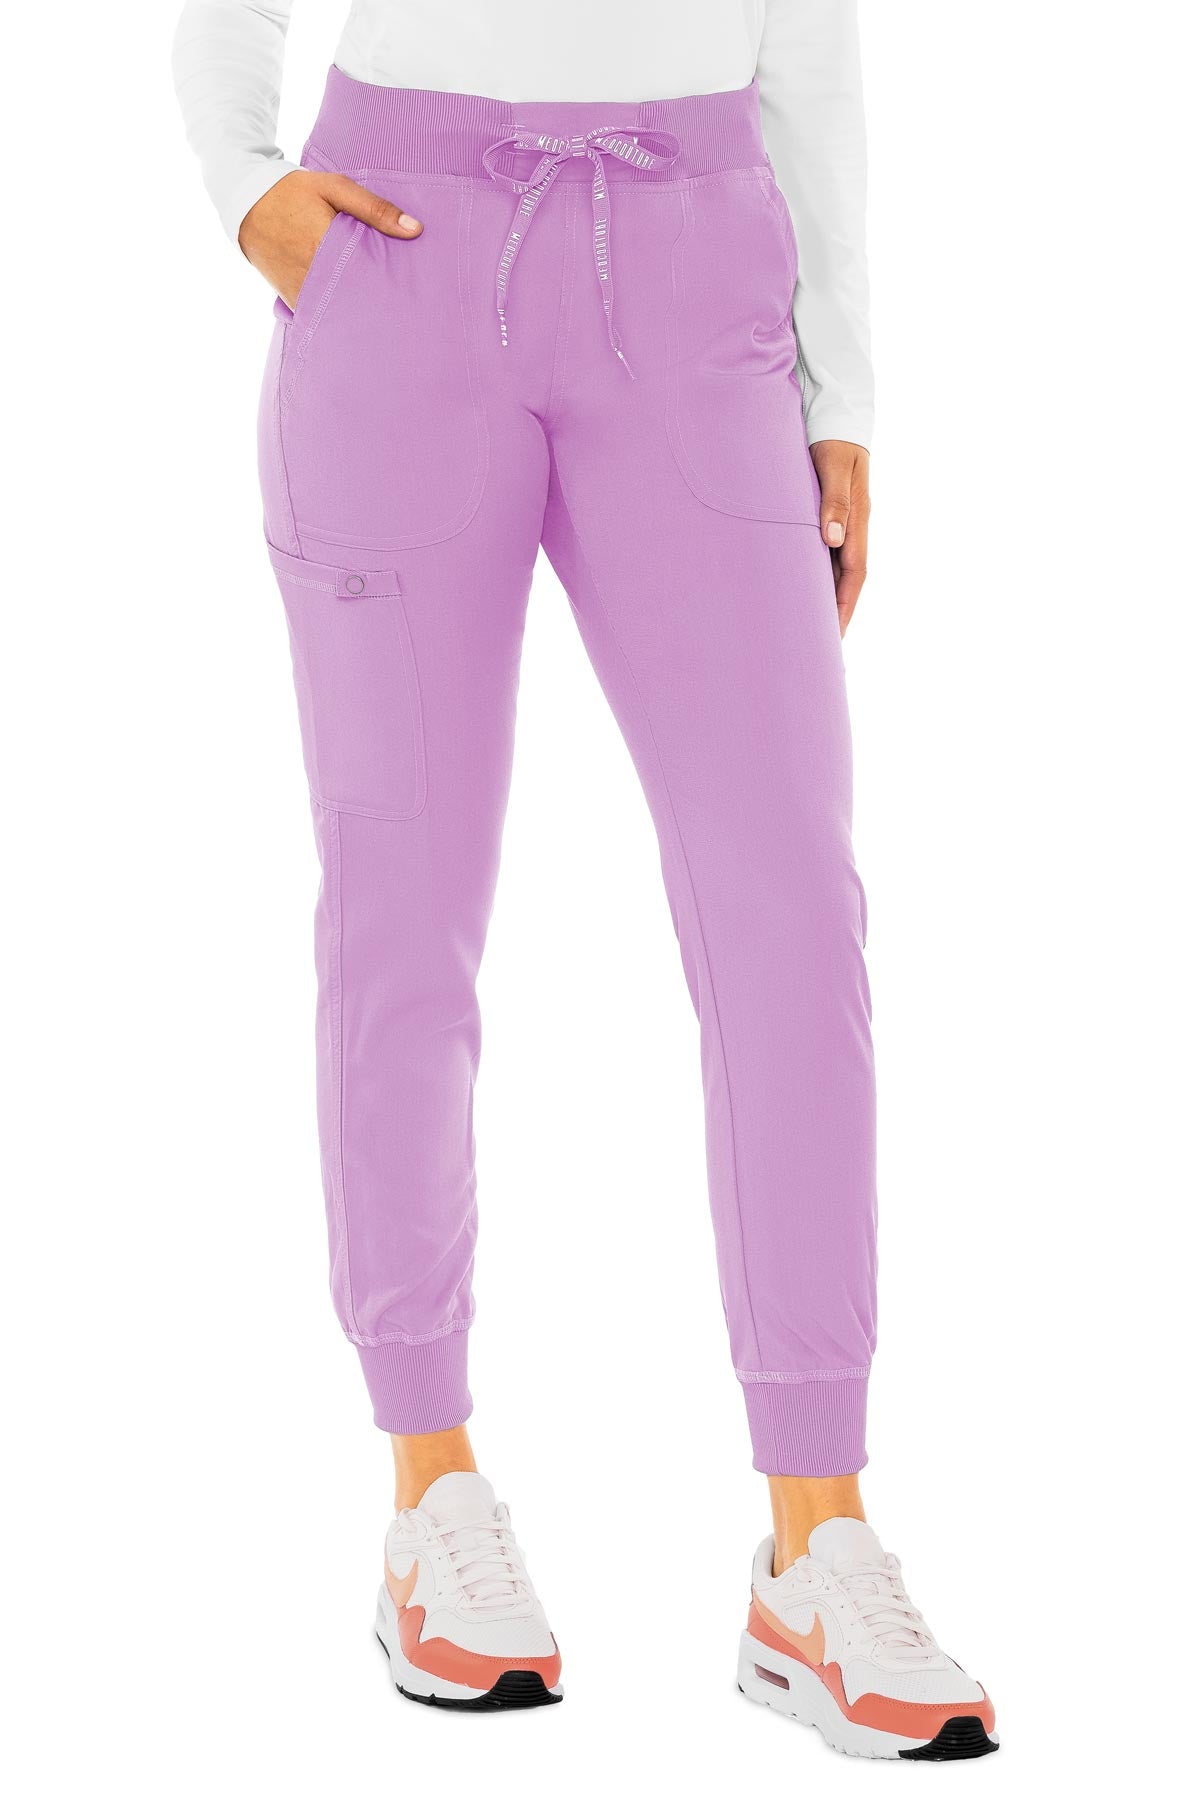 Med Couture Lilac PANT